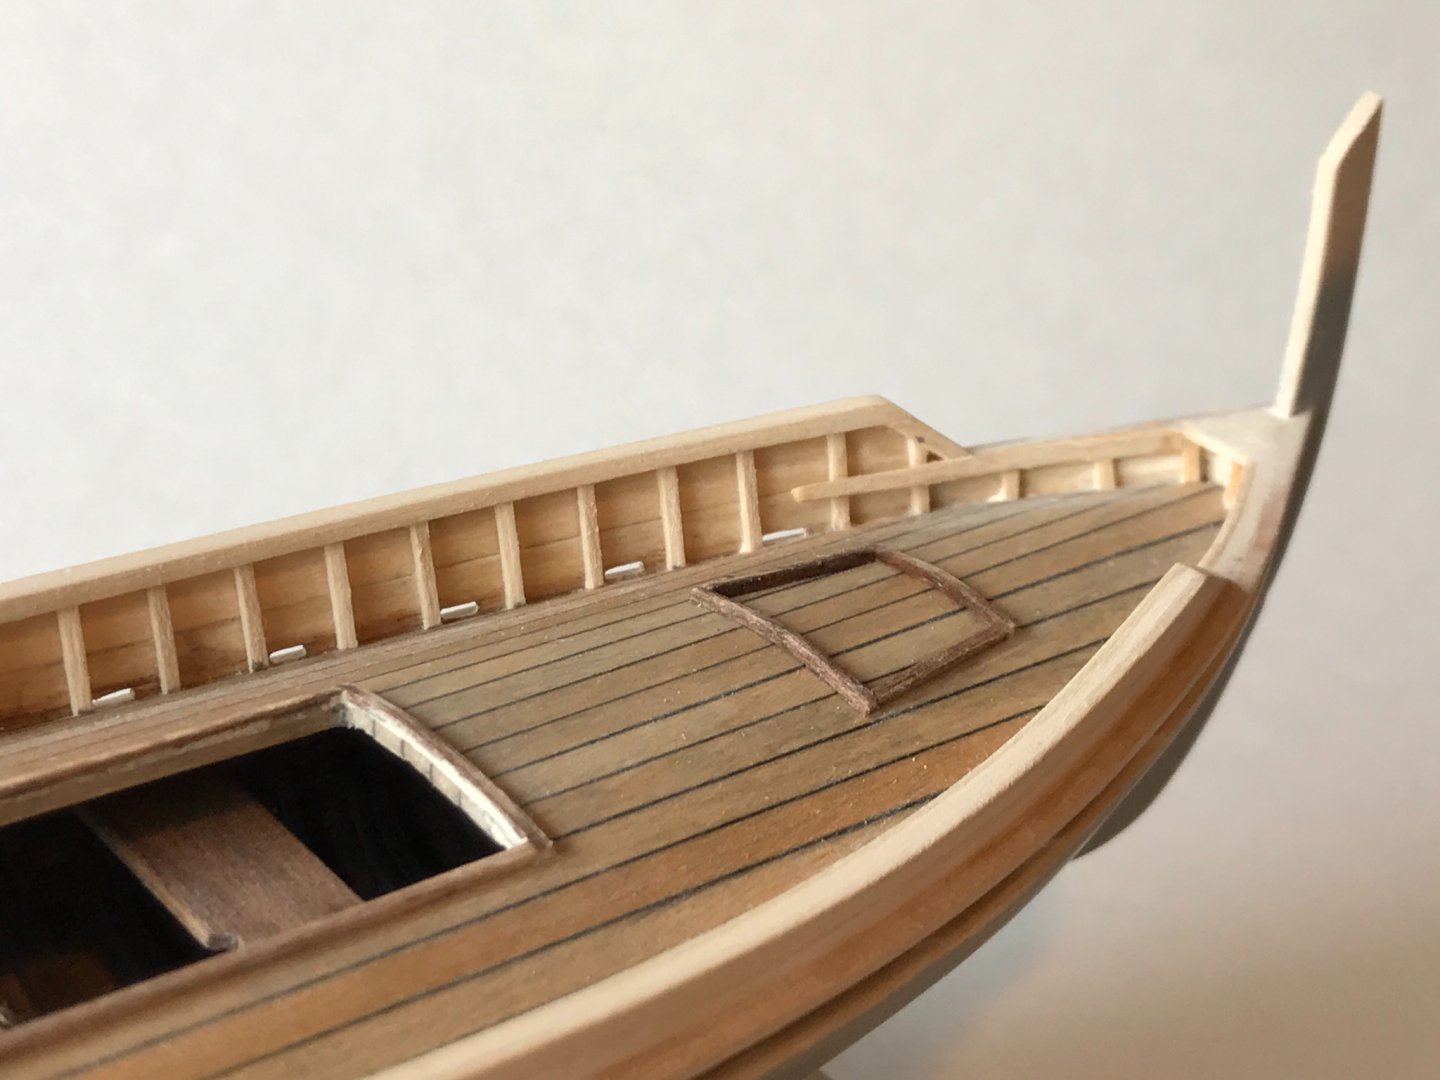 Barco Catalan by Gbmodeler - 1:48 Scale - Mediterranean Fishing Boat-  FINISHED - - Build logs for subjects built 1851 - 1900 - Model Ship World™